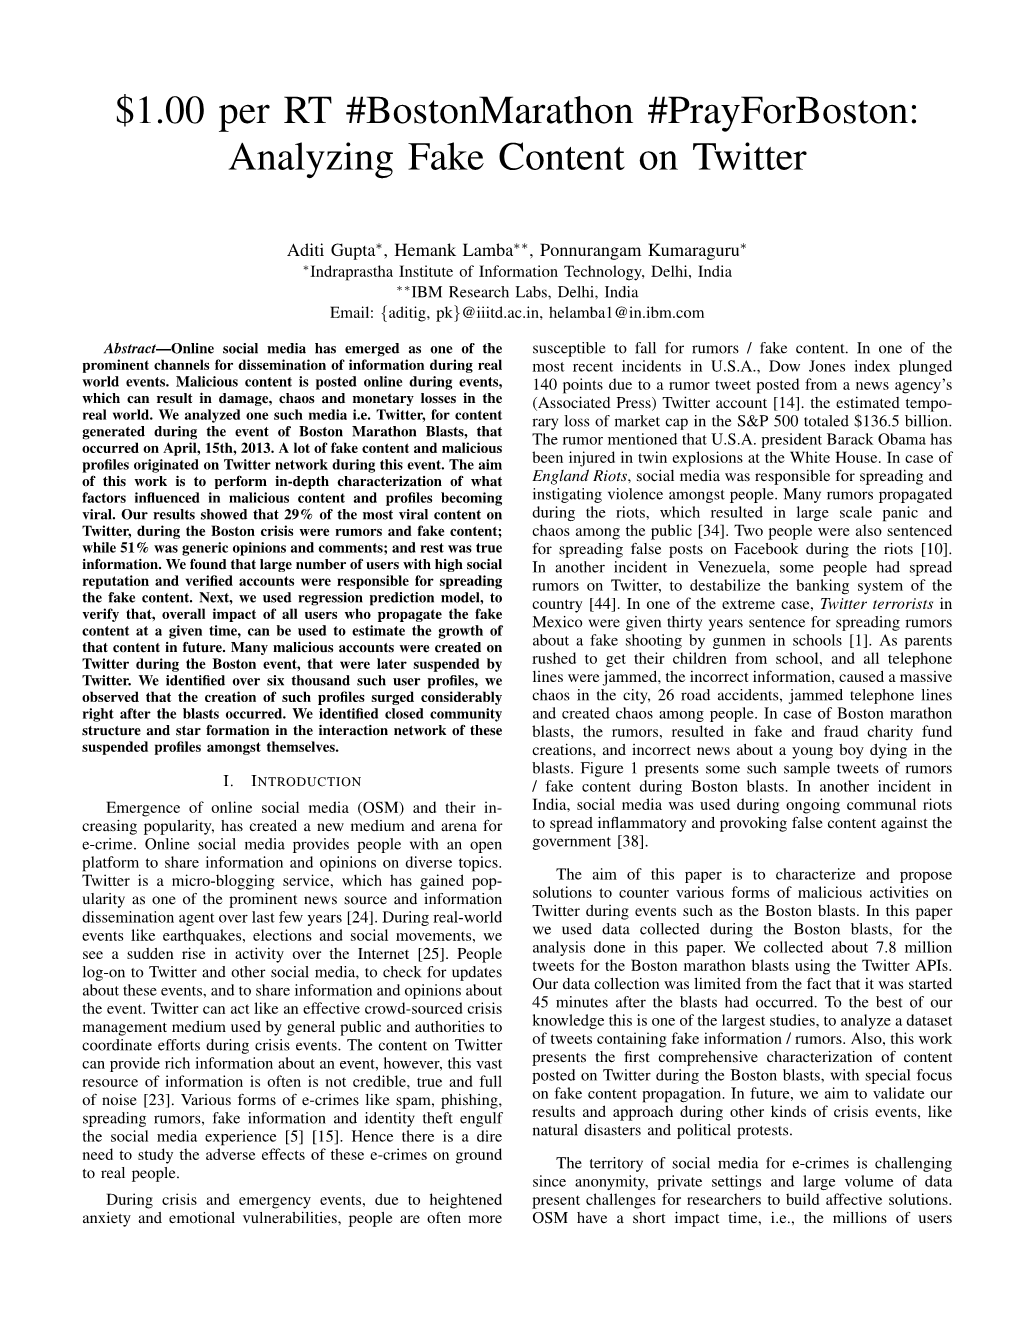 Analyzing Fake Content on Twitter